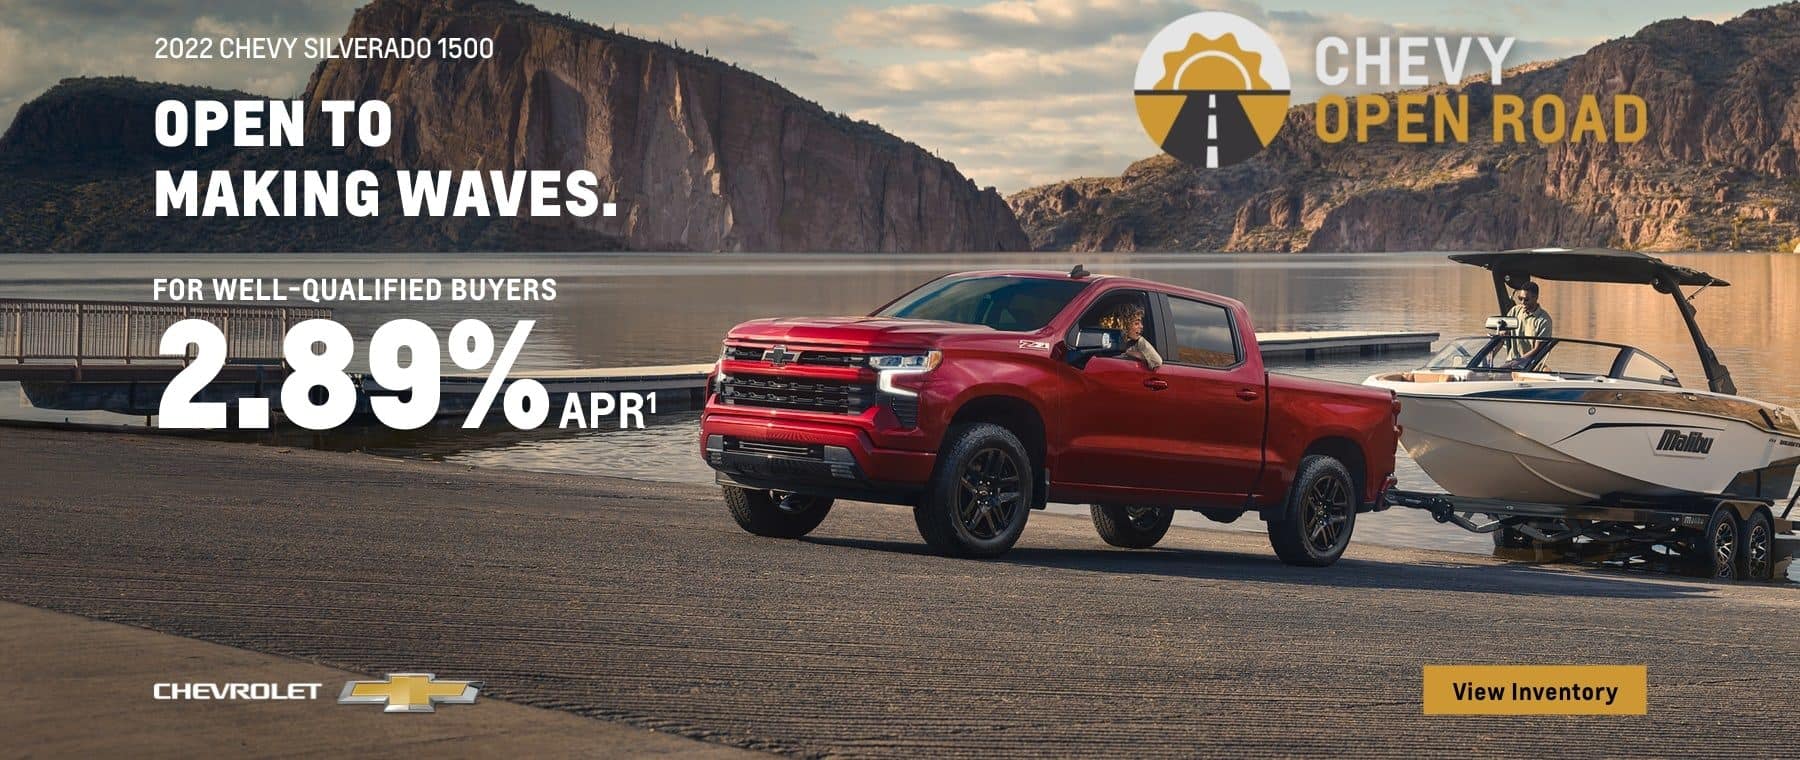 2022 Chevy Silverado 1500. Chevy Open Road. For well-qualified buyers 2.89% APR.